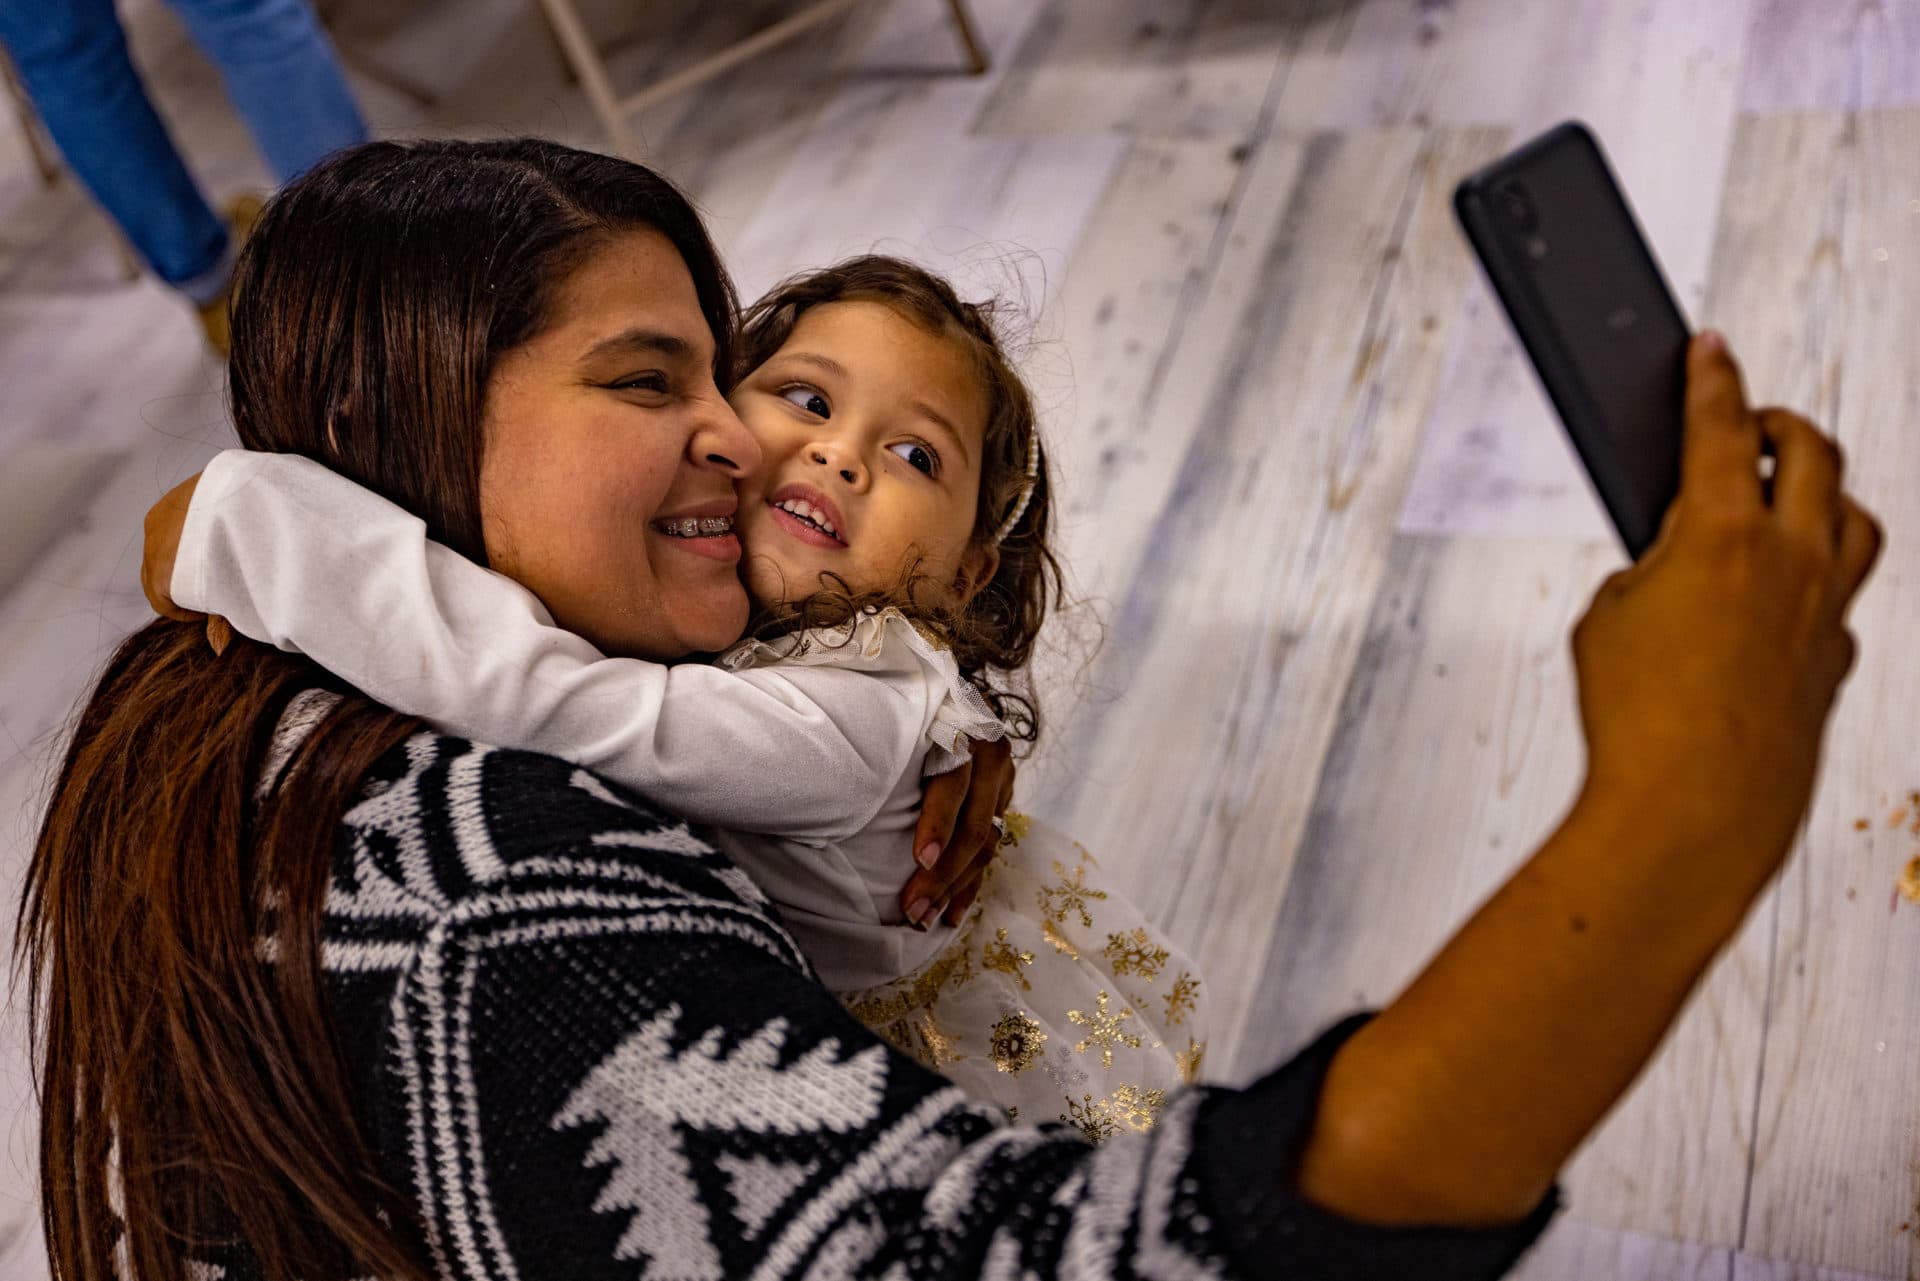 Adalay Ramos, 3, embraces her mother and takes a selfie at the party. (Jesse Costa/WBUR)